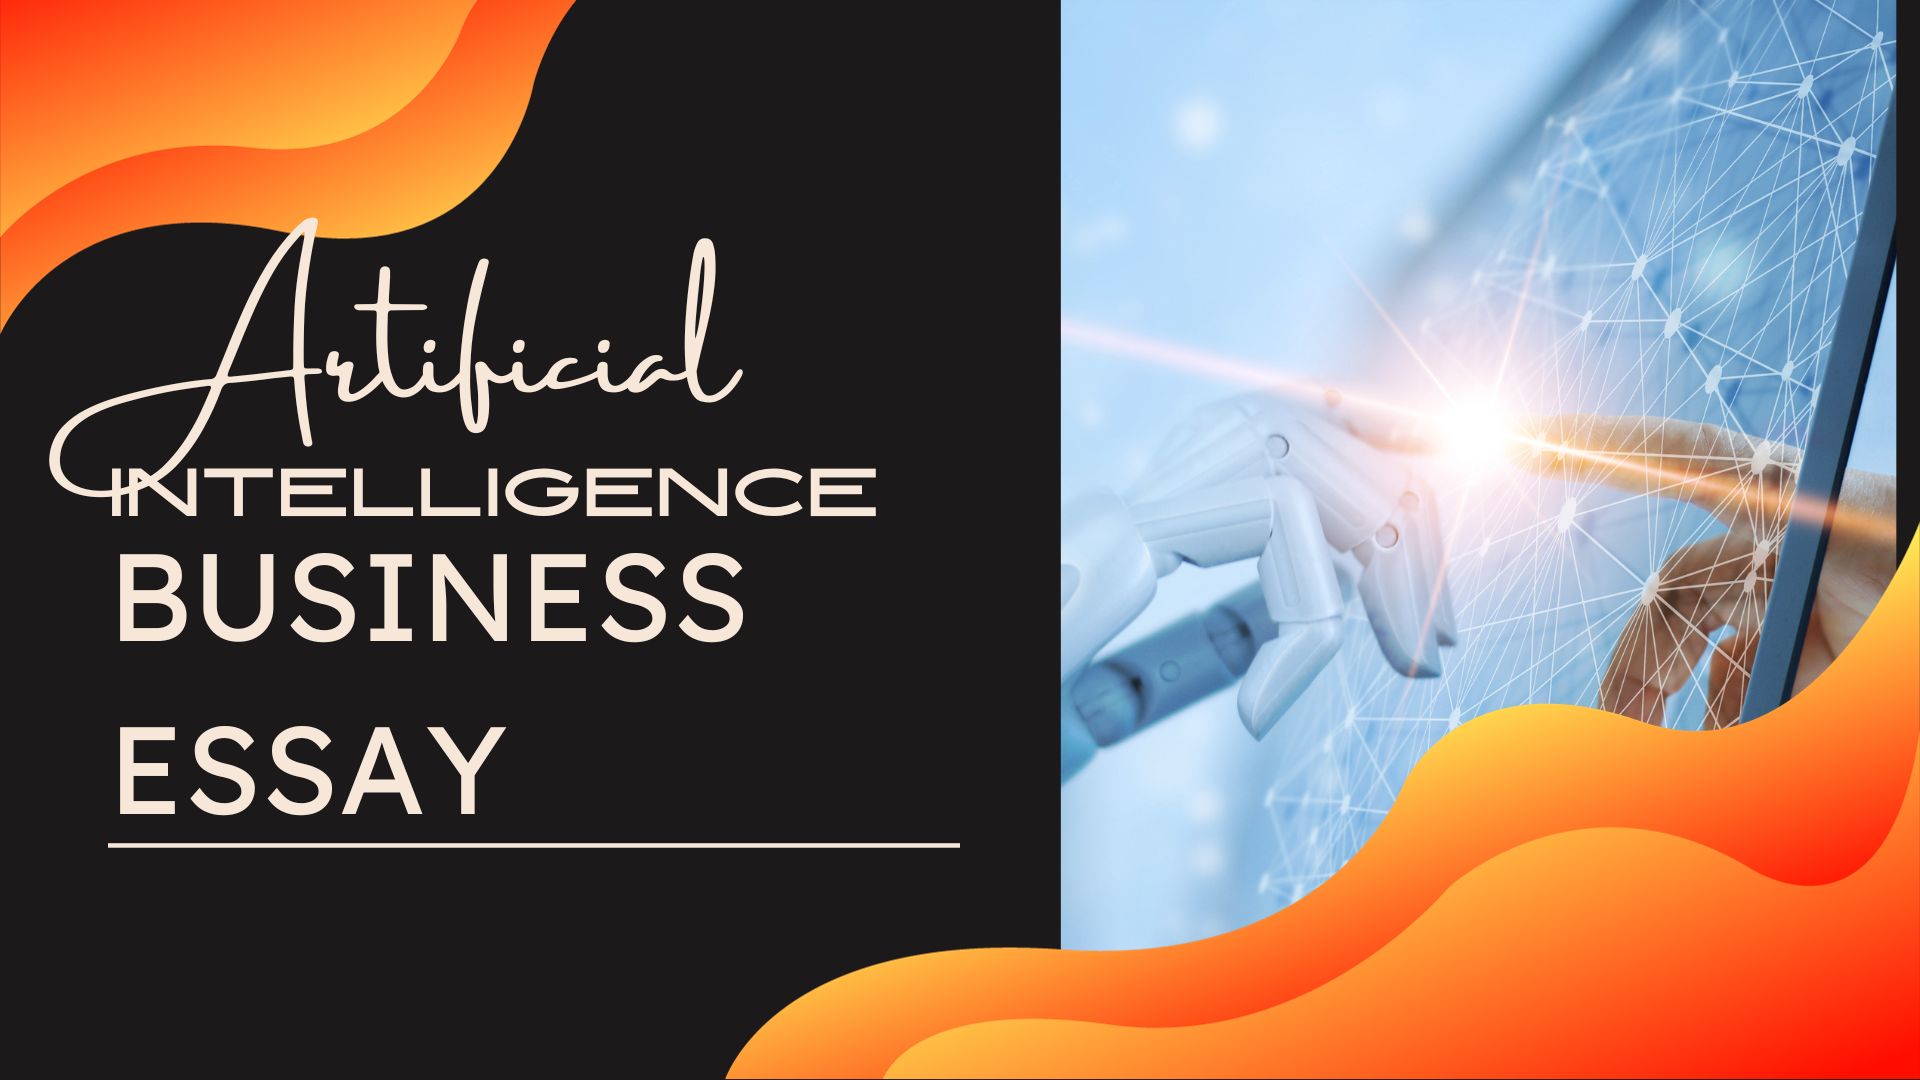 Artificial Intelligence in Business Essay